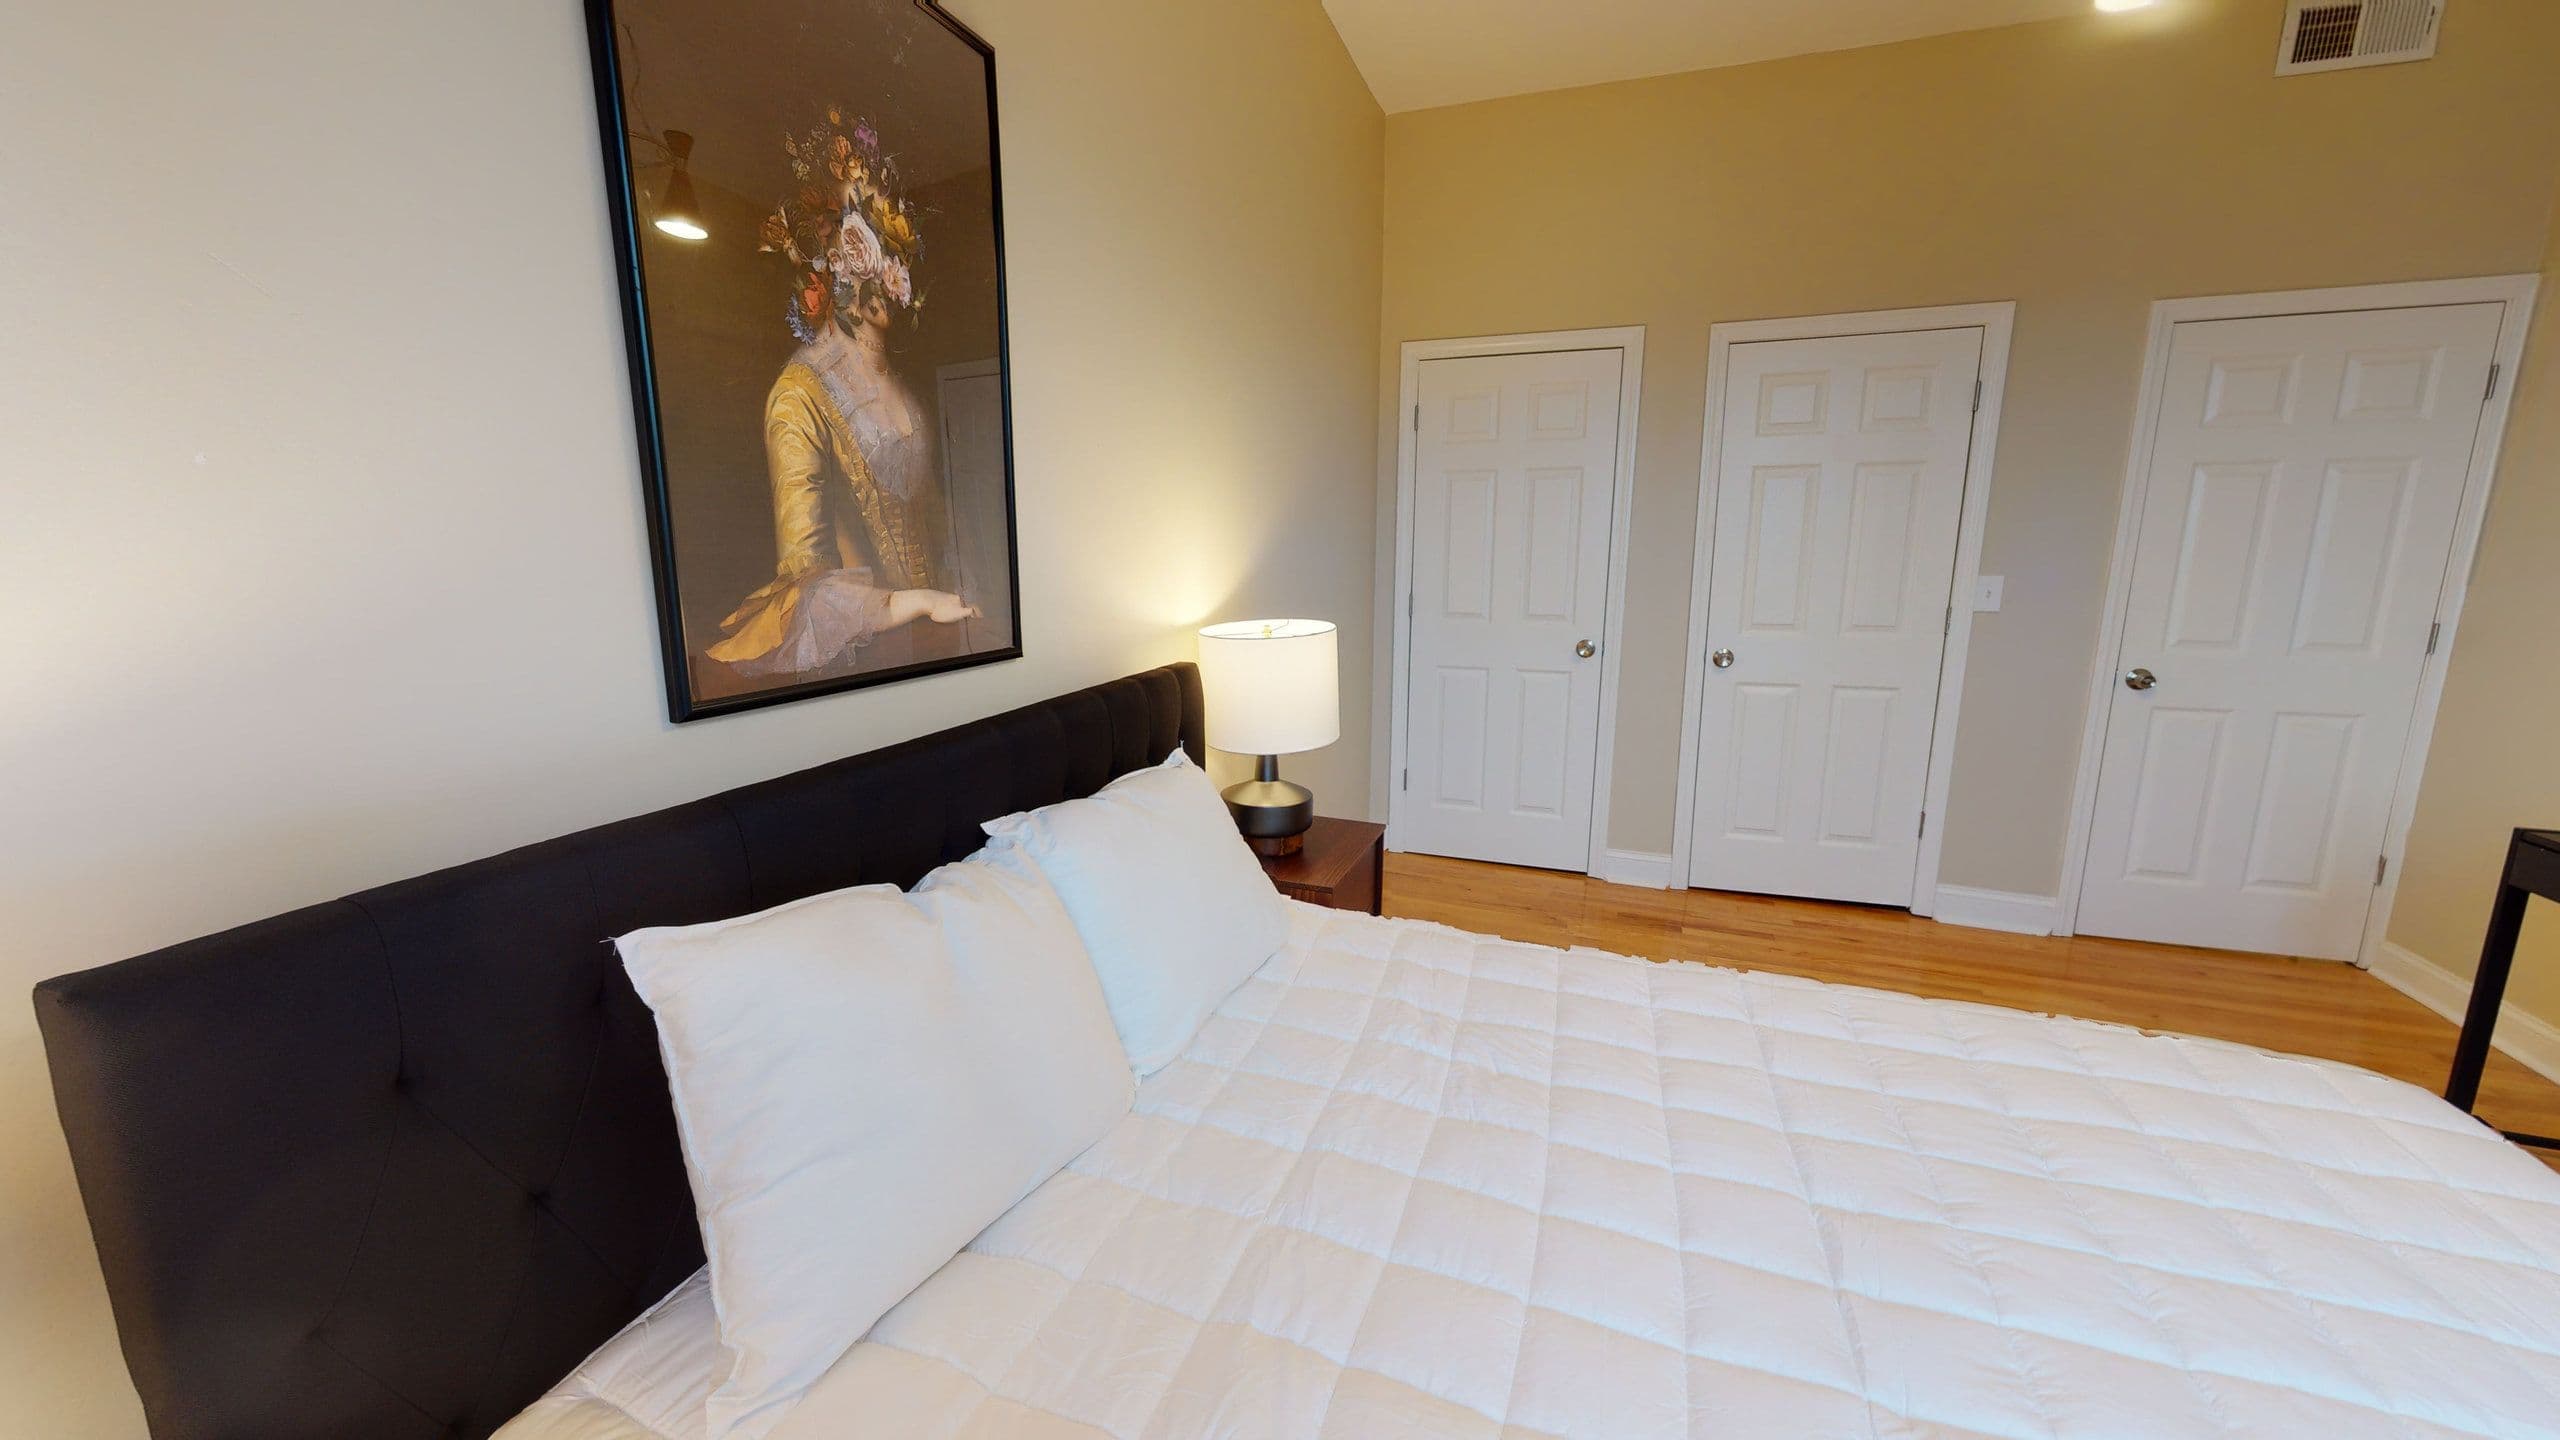 Photo 22 of #1159: Queen Bedroom A at June Homes